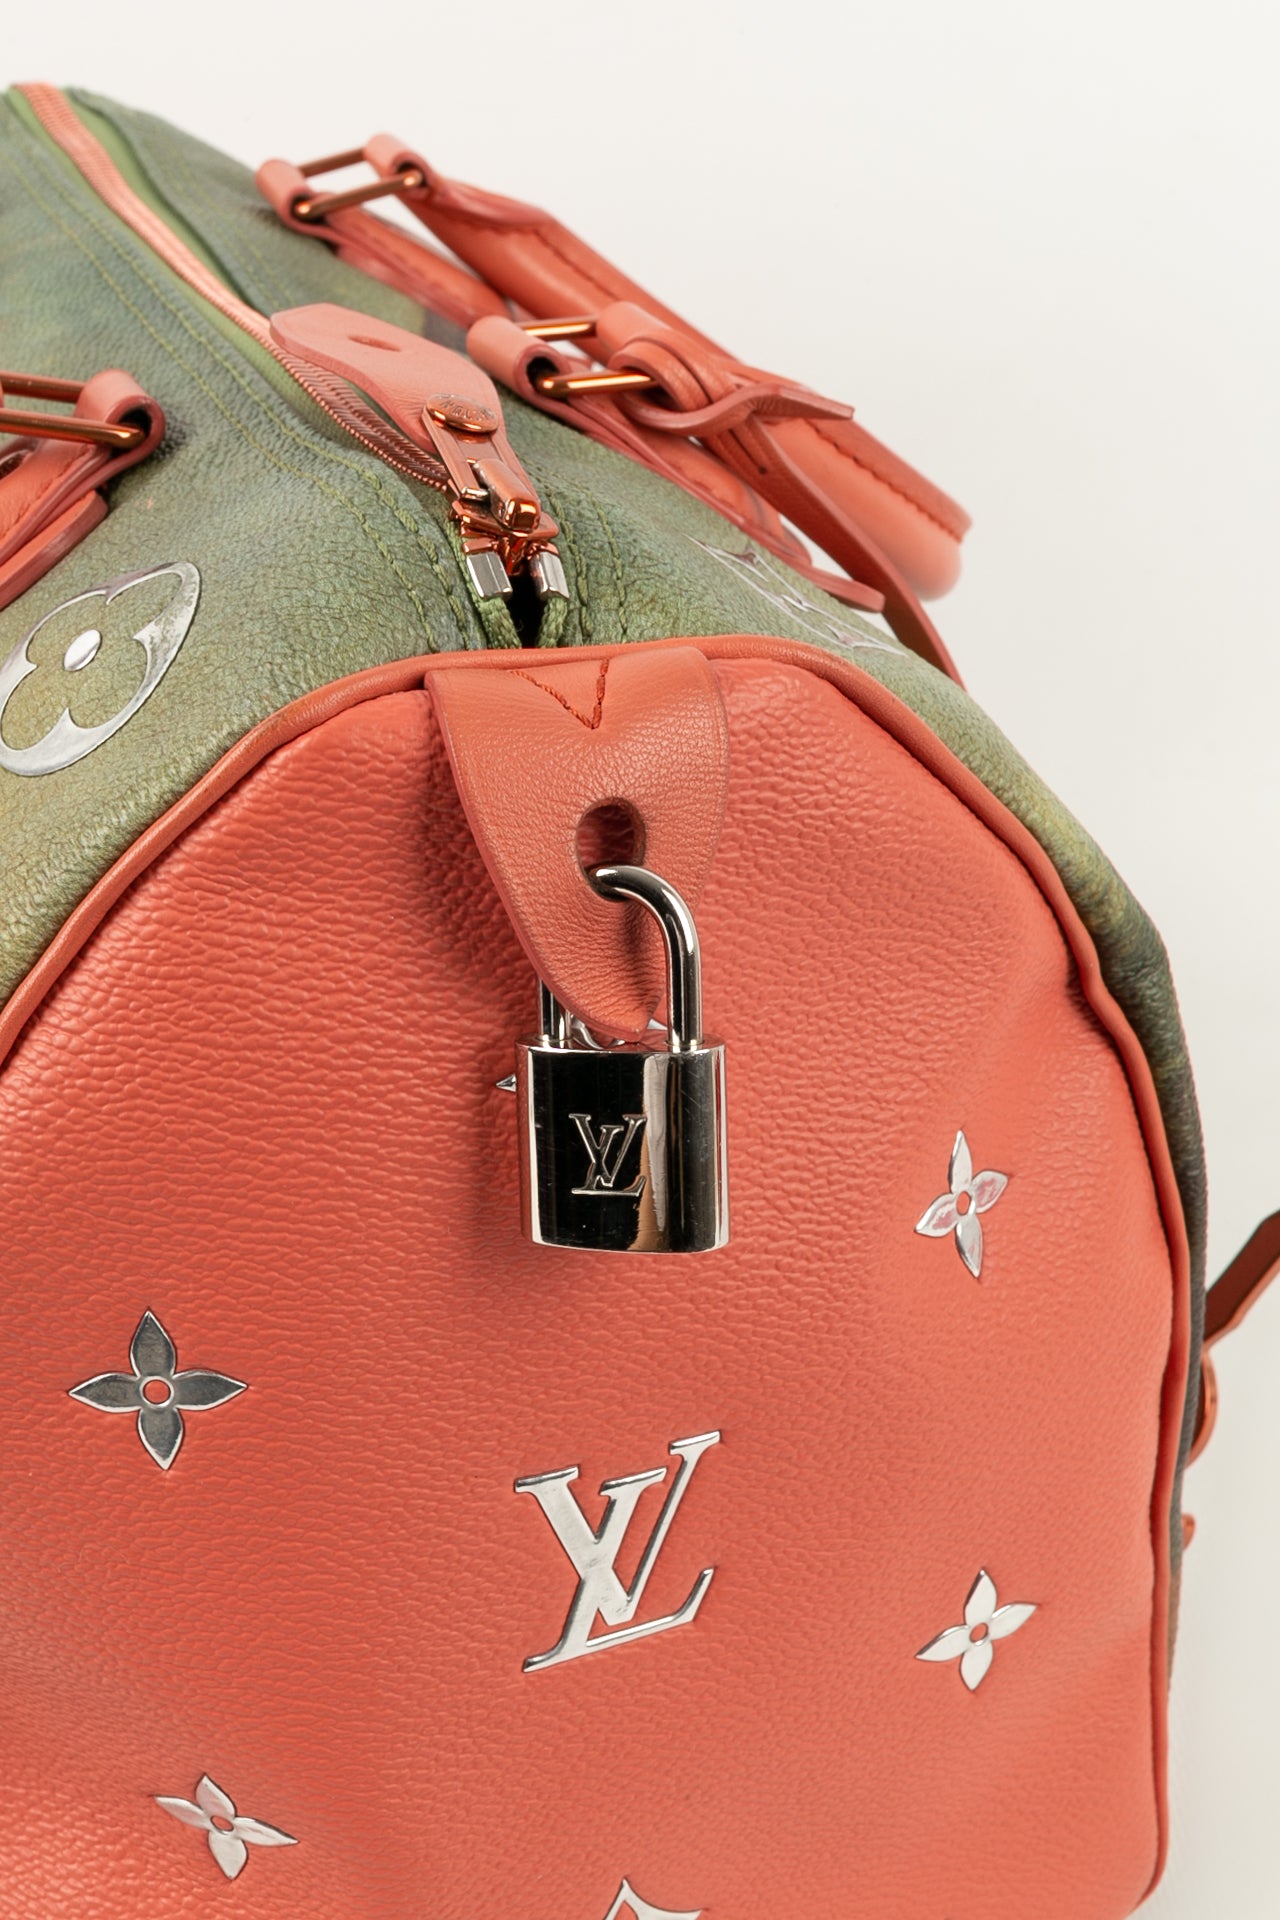 Louis Vuitton Da Vinci Leather Bag on Display in Toronto Store Editorial  Photography - Image of design, artist: 92375312